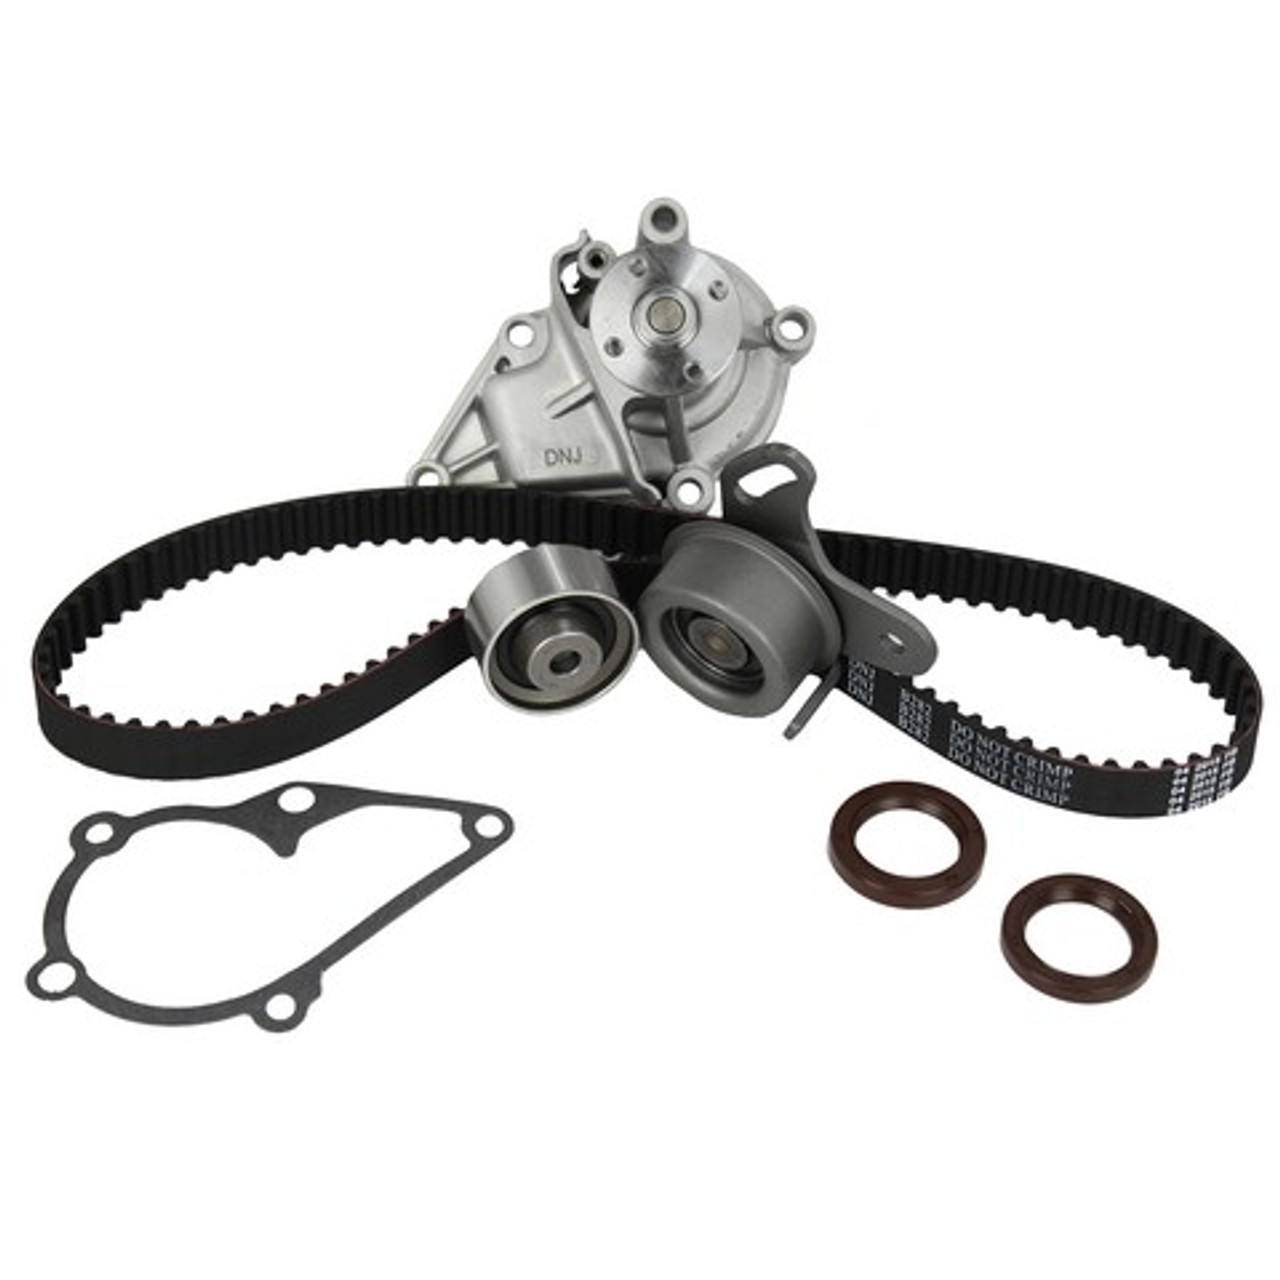 1997 Hyundai Accent 1.5L Timing Belt Kit with Water Pump TBK122WP.E2